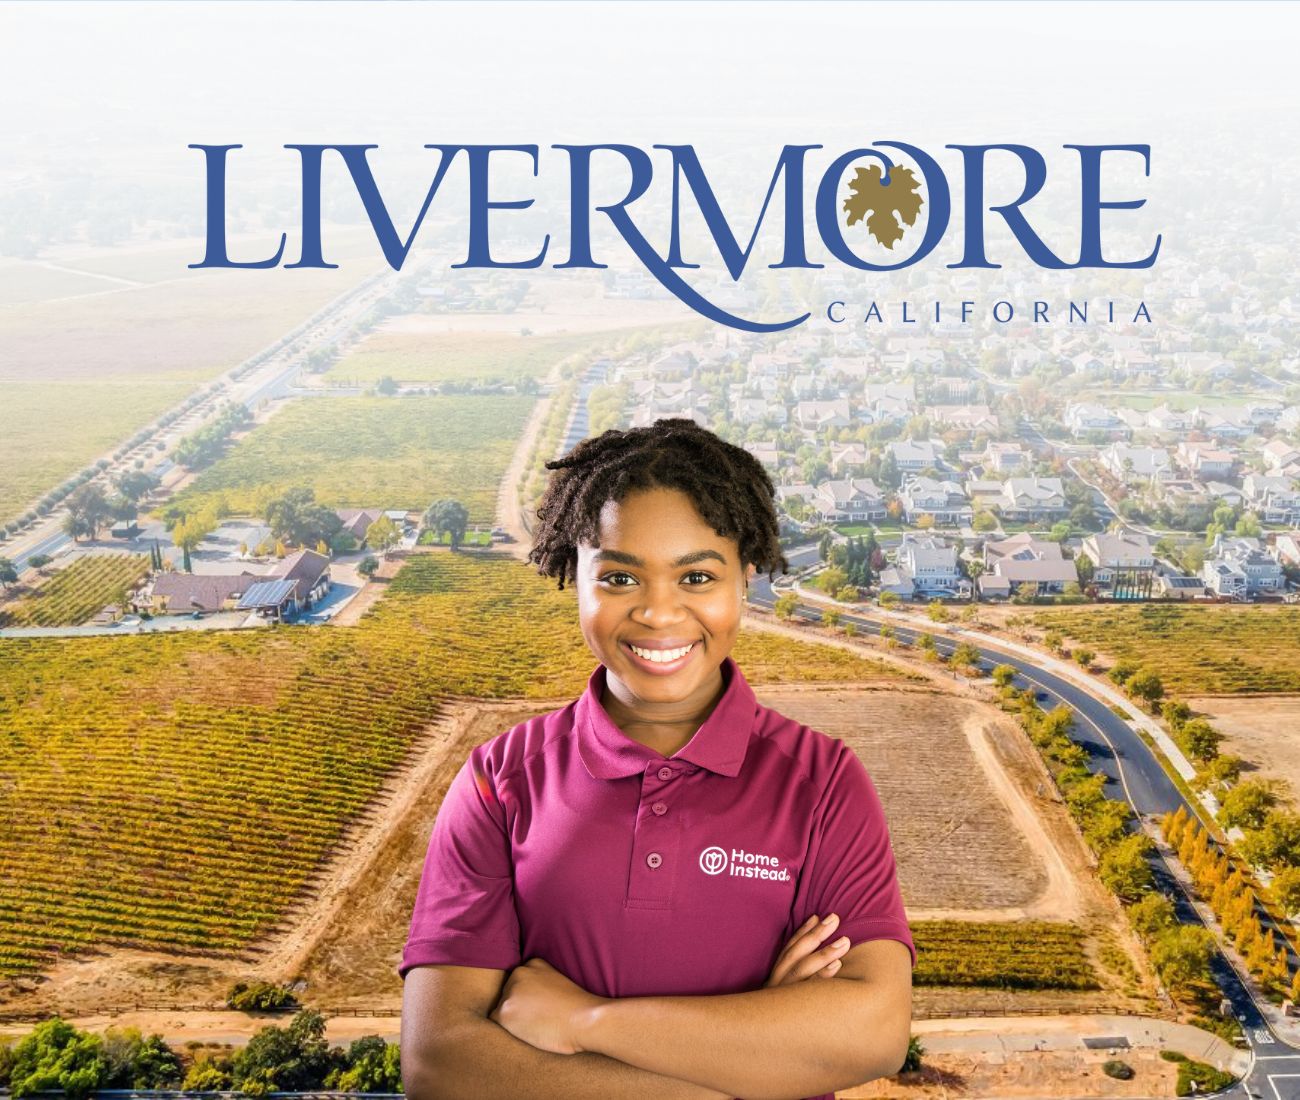 Home Instead caregiver with Livermore, California in the background